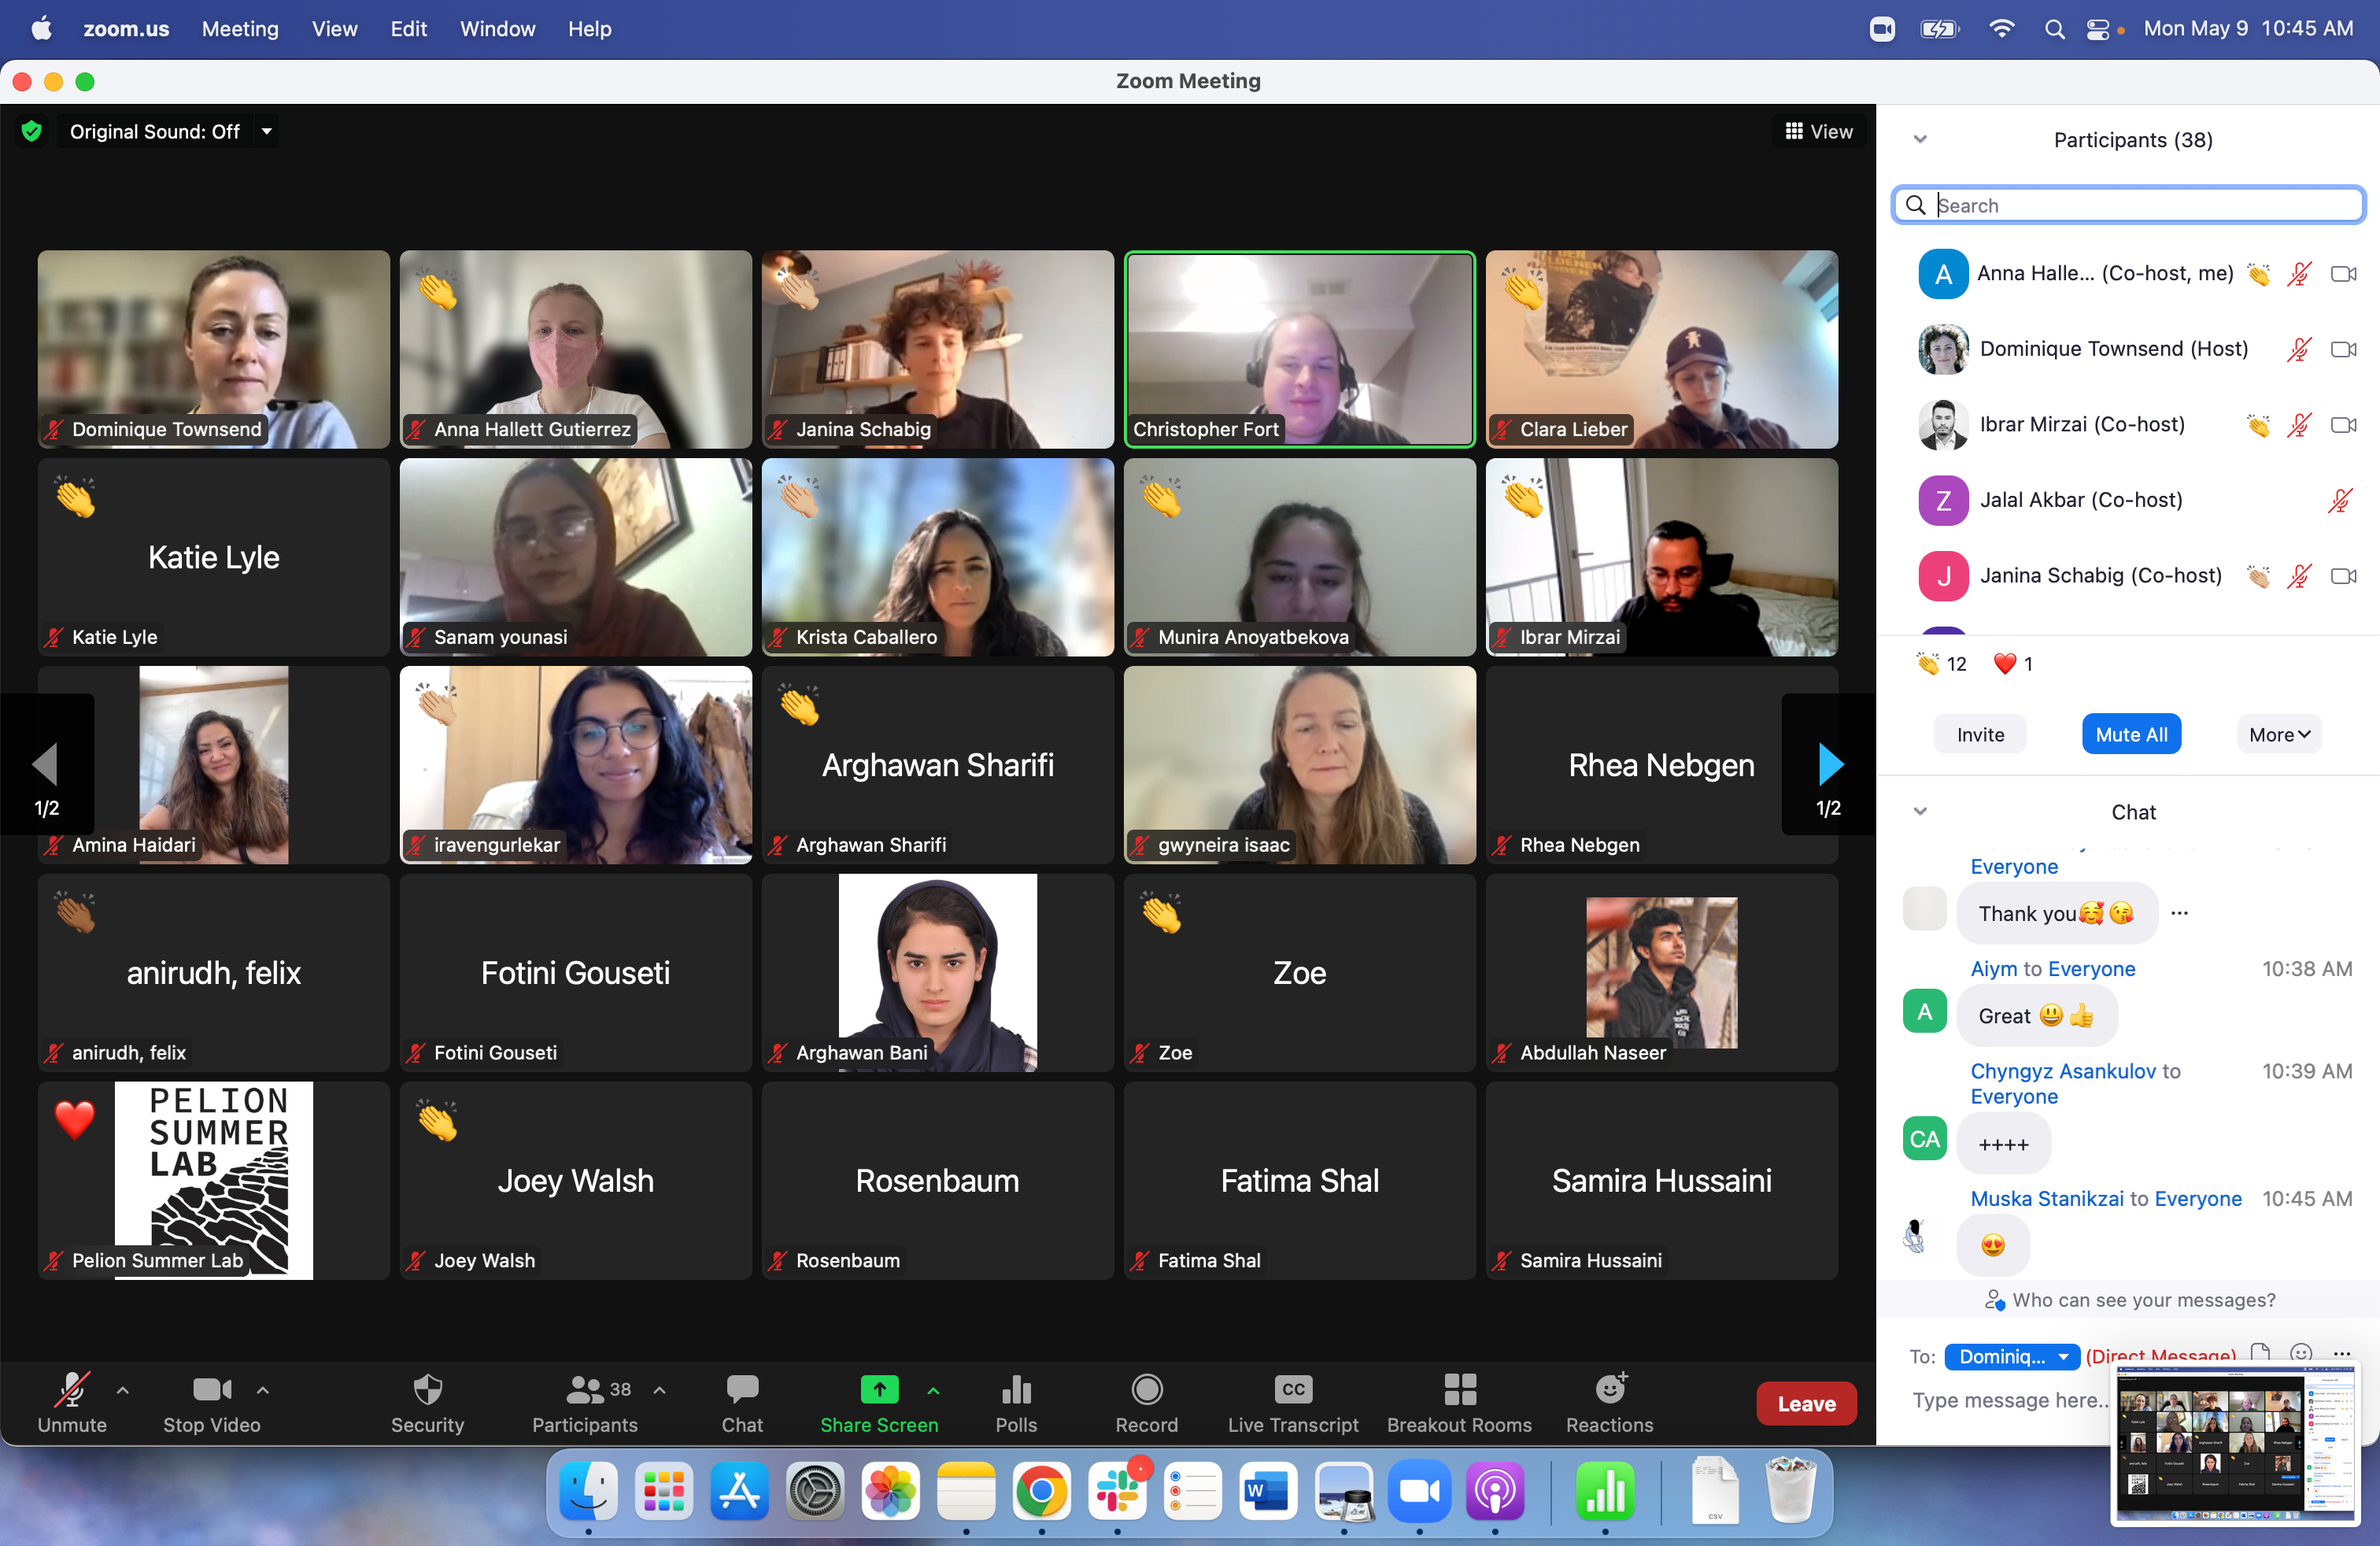 Screenshot from a Zoom meeting with applause reactions from the attendees.